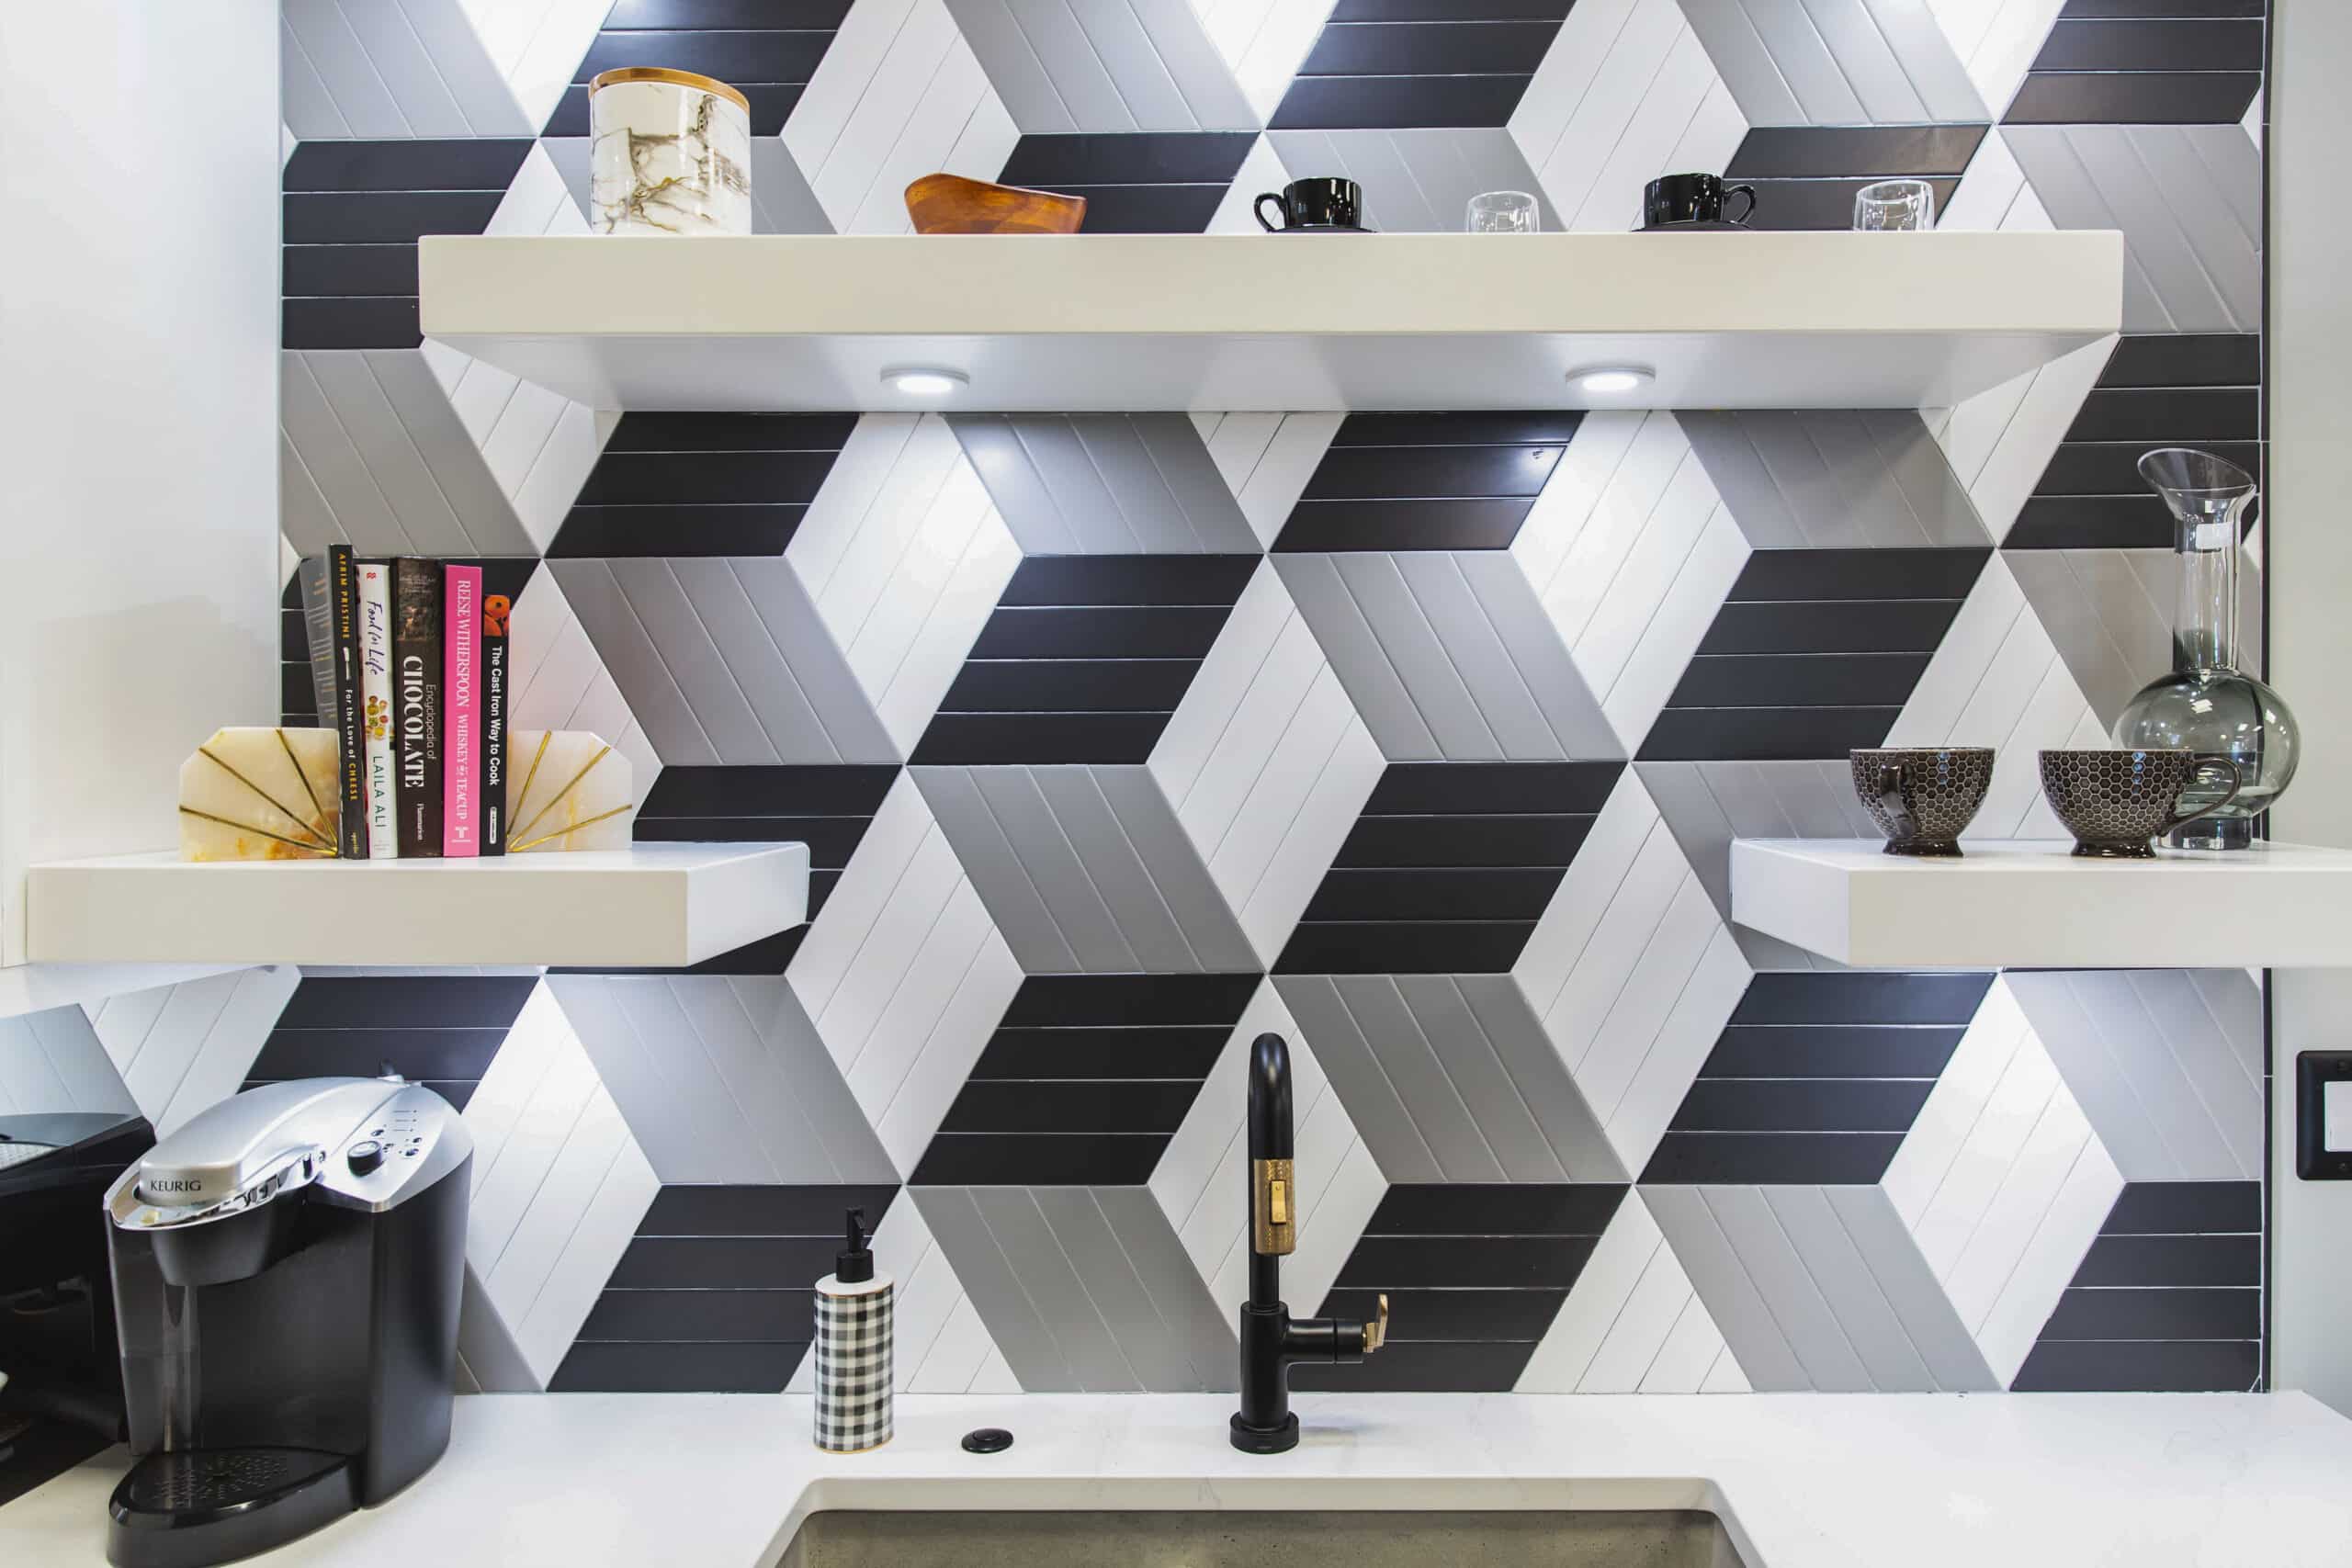 A kitchen with black and white geometric tiles, creating a stylish and modern design